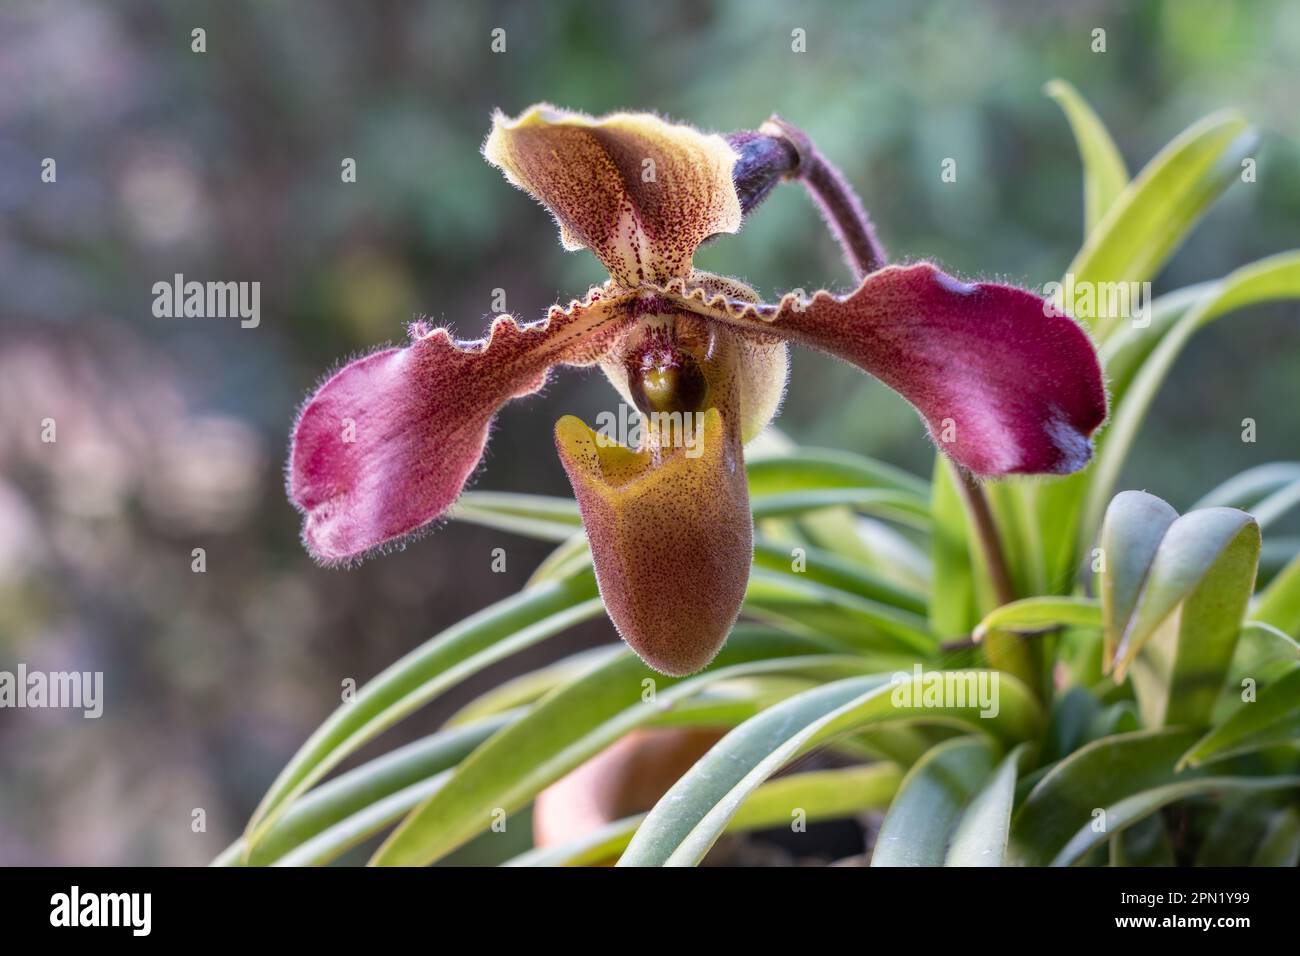 Closeup view of bright purple pink and yellow brown flower of lady slipper tropical orchid paphiopedilum hirsutissimum species blooming outdoors Stock Photo